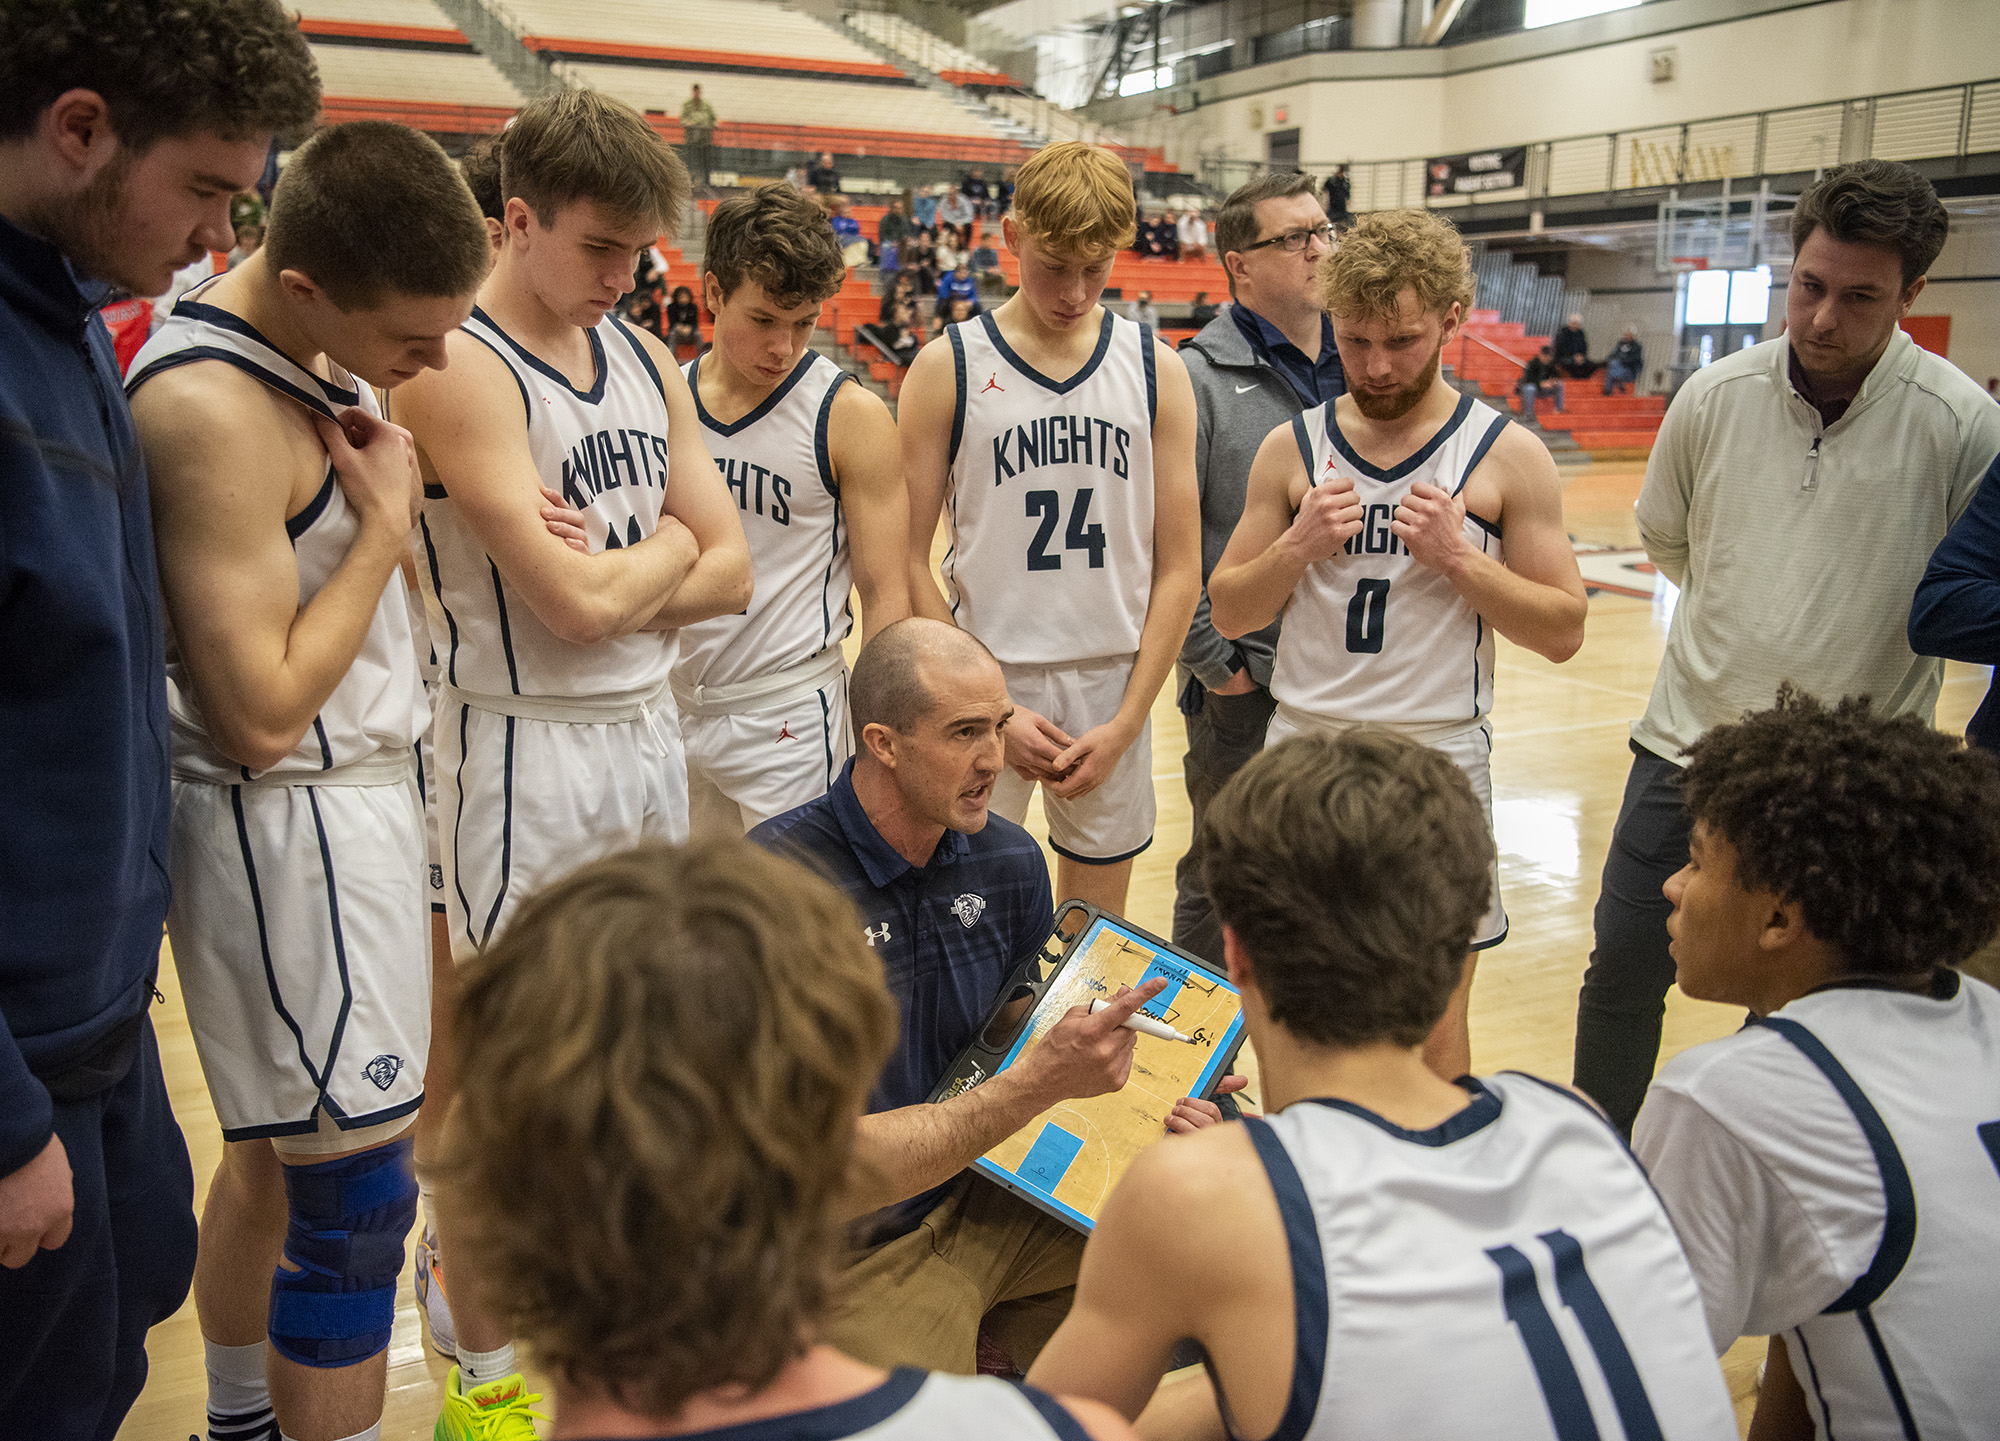 King's Way head boys basketball coach Daven Harmeling, center, talks to the team between quarters Saturday, Feb. 25, 2023, during the Knights’ 59-44 win against La Salle at Battle Ground High School.